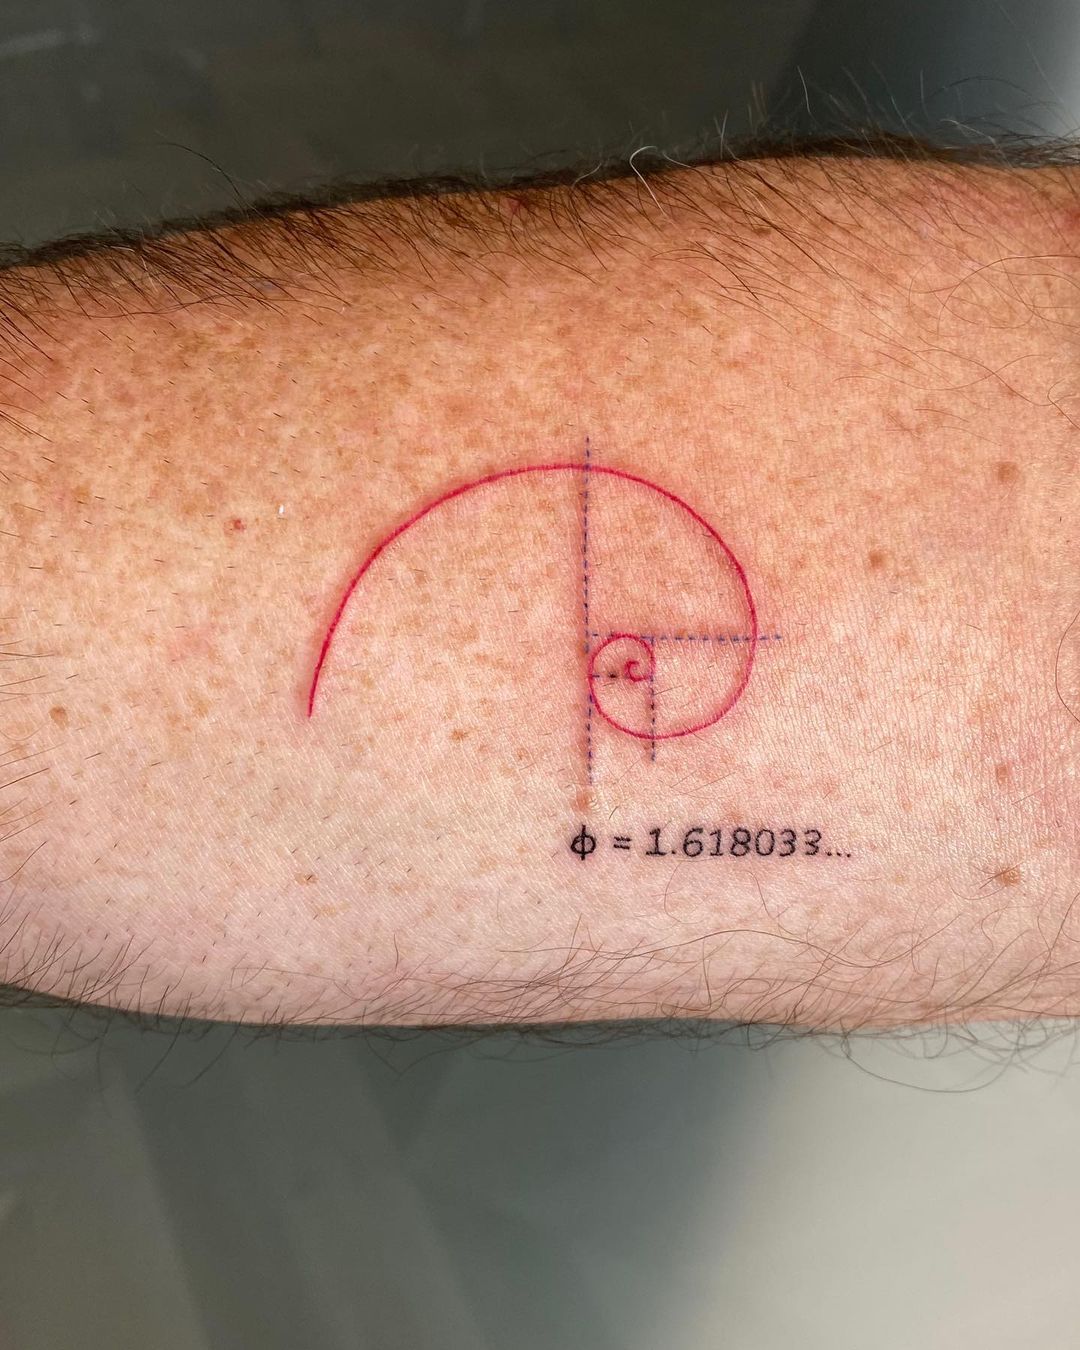 25 Math-Inspired Tattoos for All the Mathletes Out There